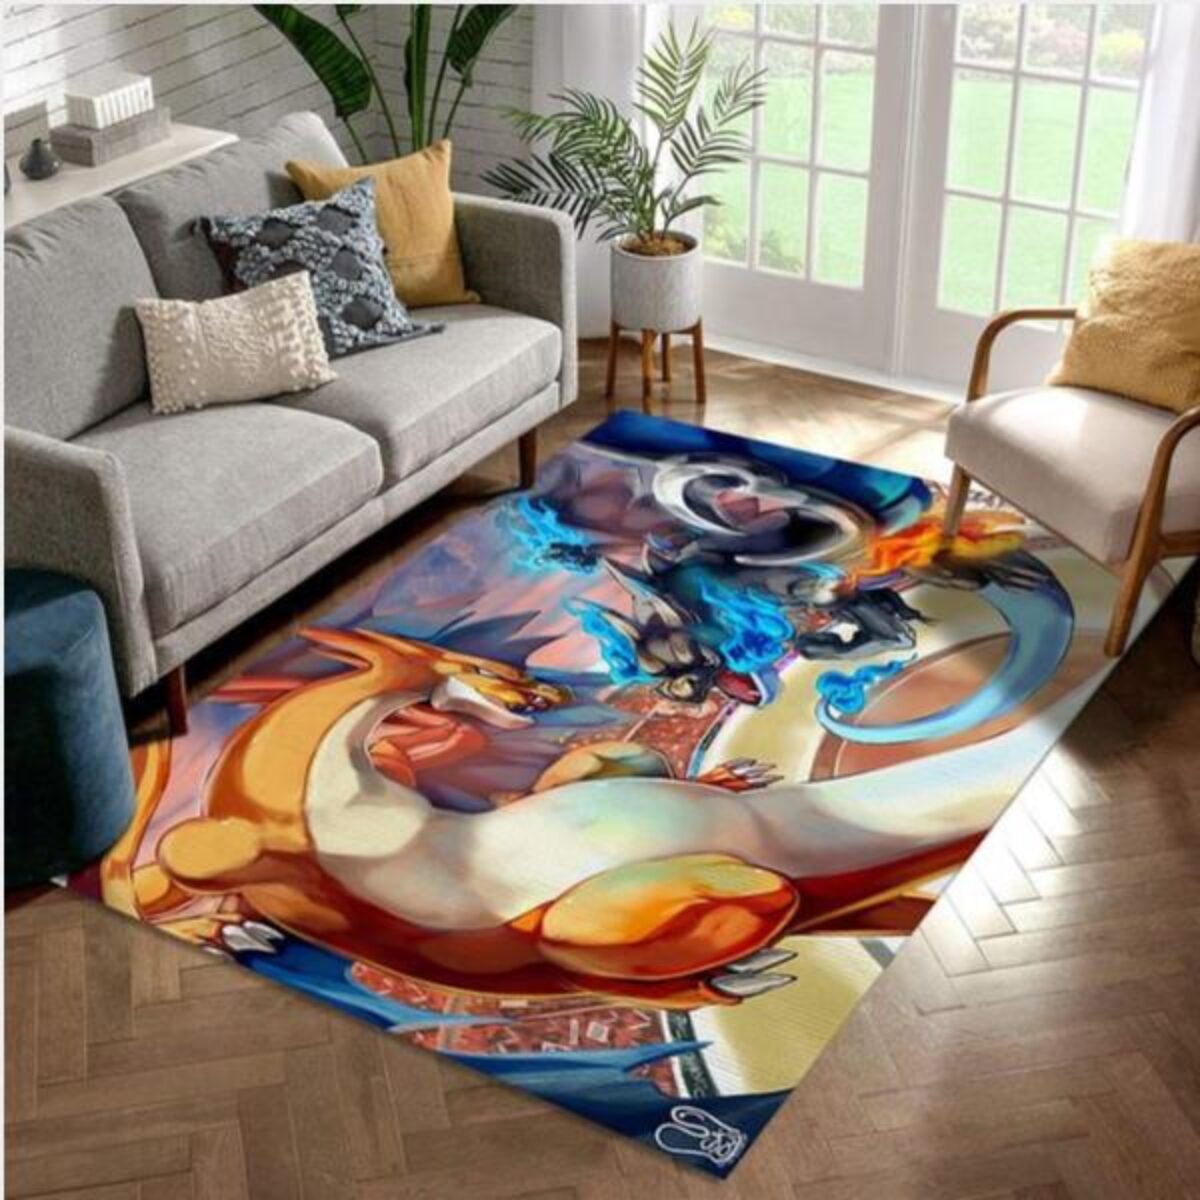 Making Epic Anime Rugs | The process for making these giant anime rugs is  absolutely mesmerising 😮👏 | By UNILADFacebook